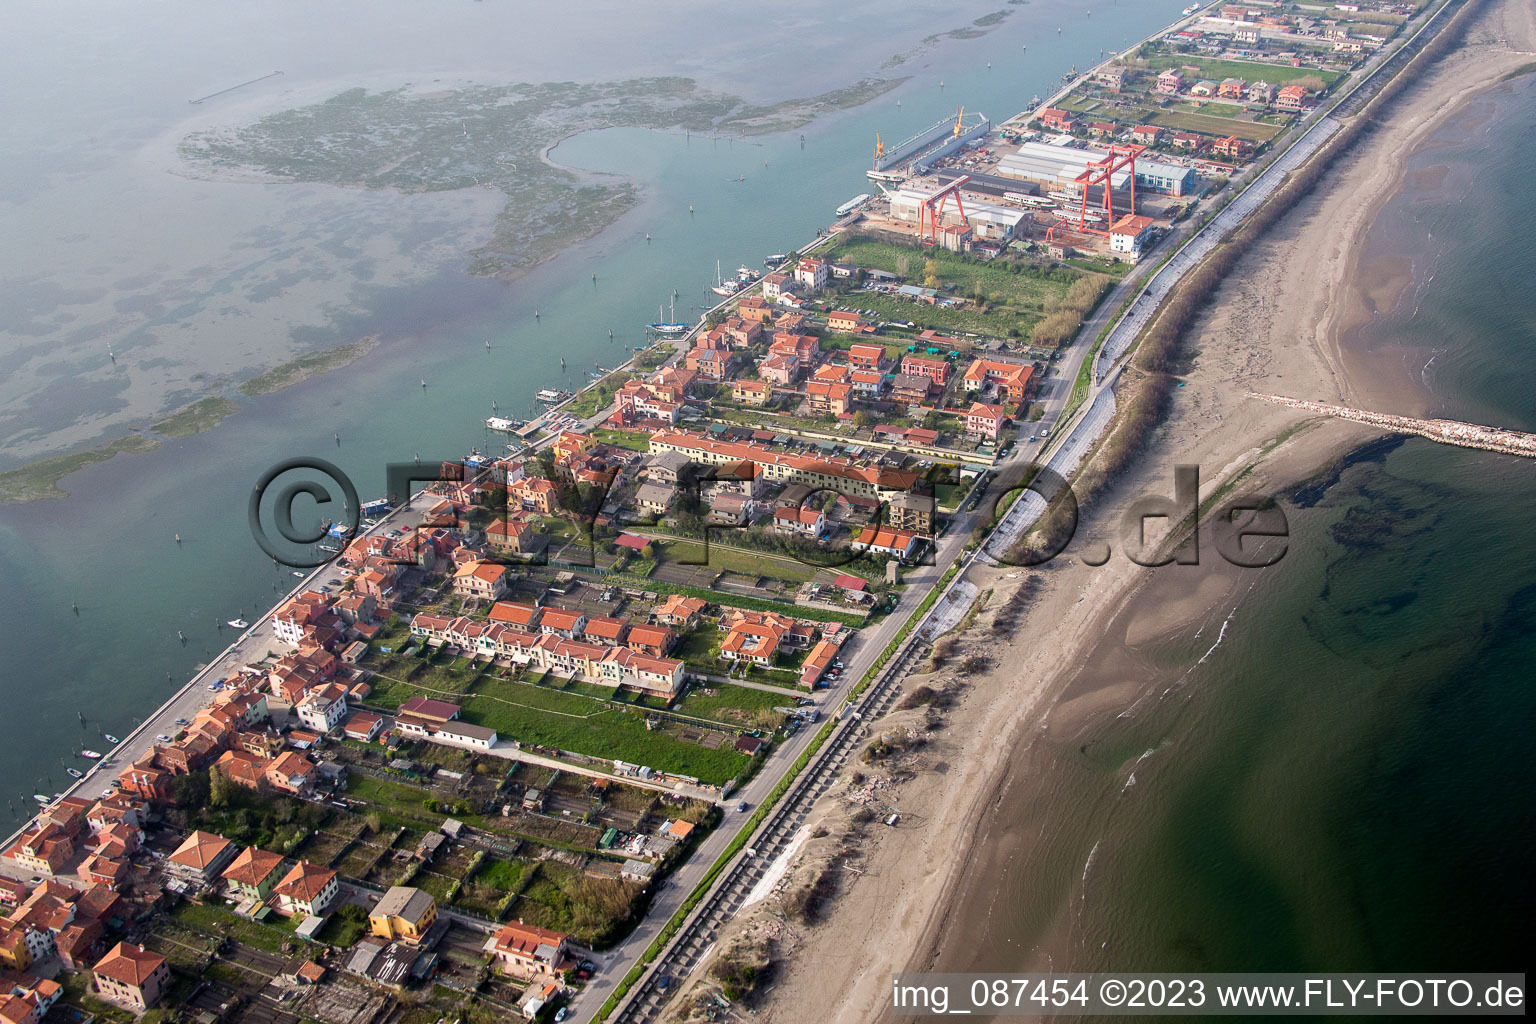 Aerial photograpy of Townscape on the seacoast of Mediterranean Sea in San Vito in Veneto, Italy